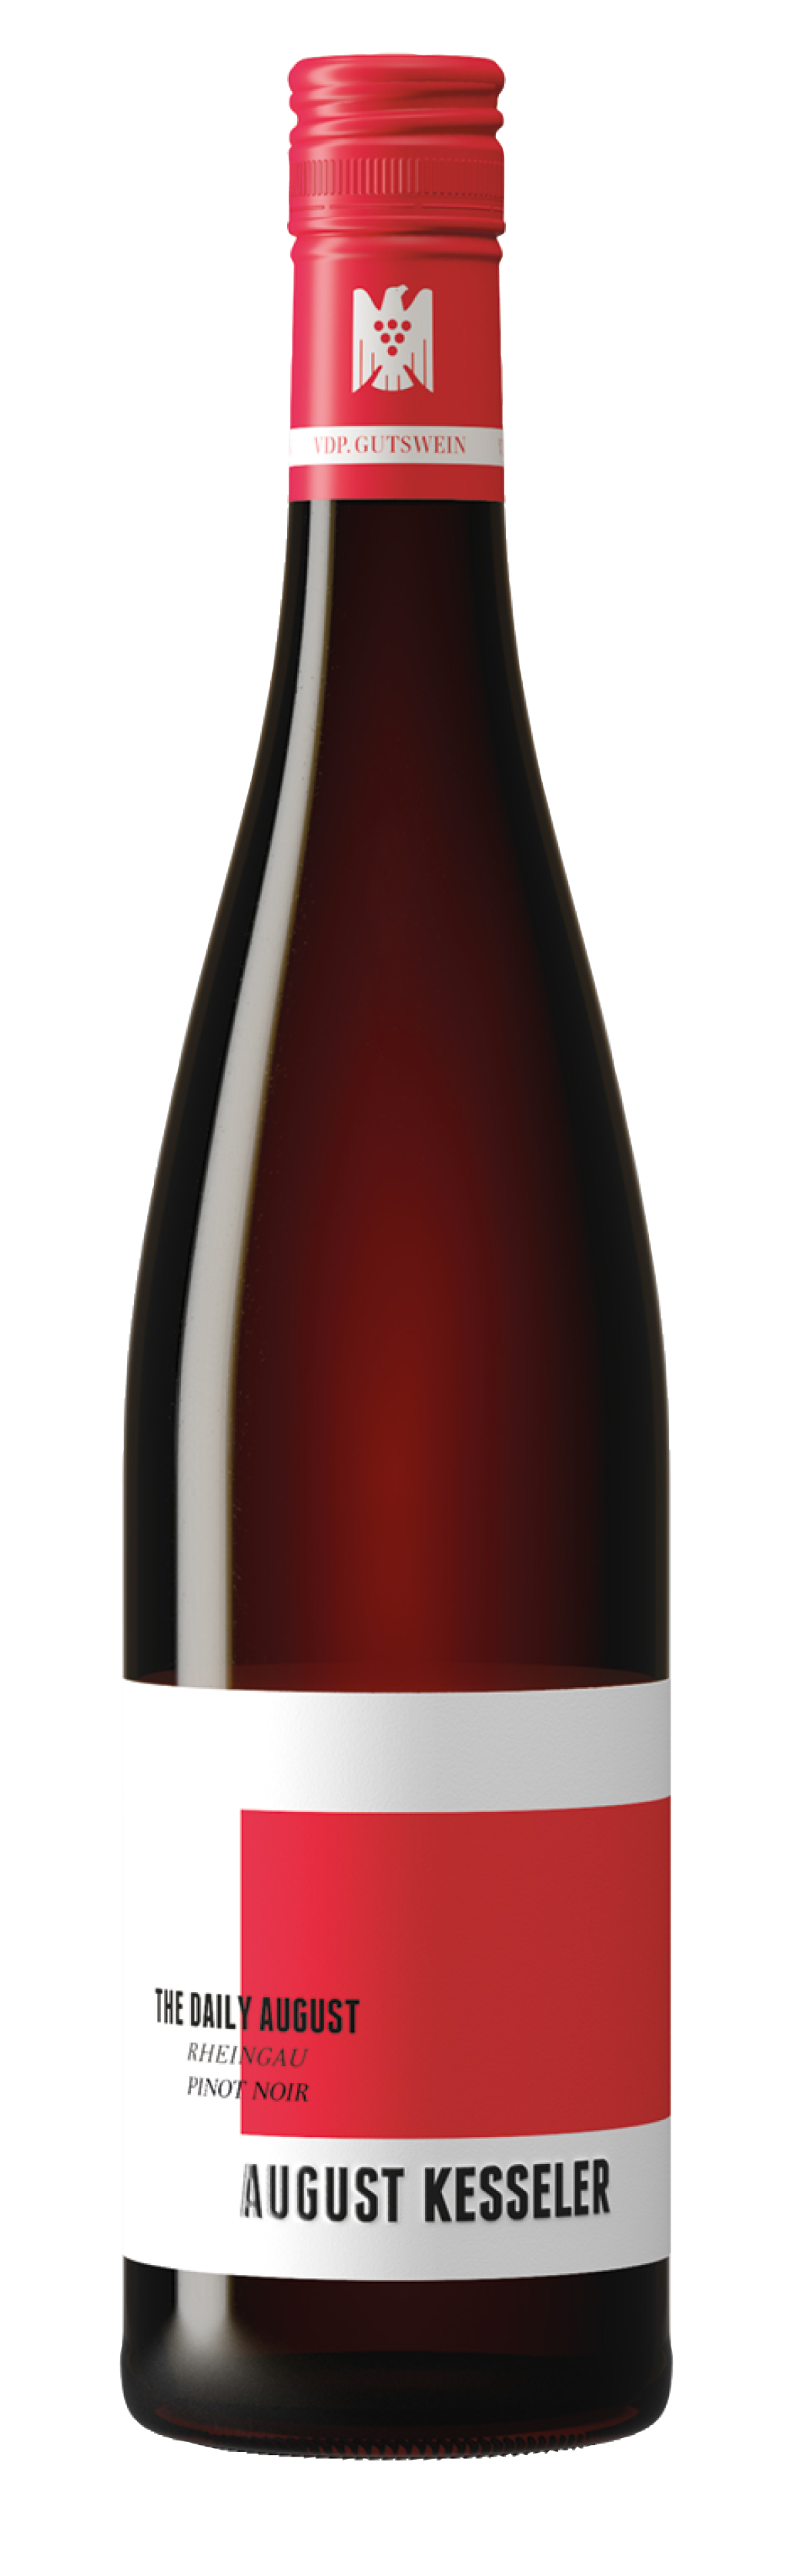 August Kesseler<br />2018 The Daily August Pinot Noir<br>Germany